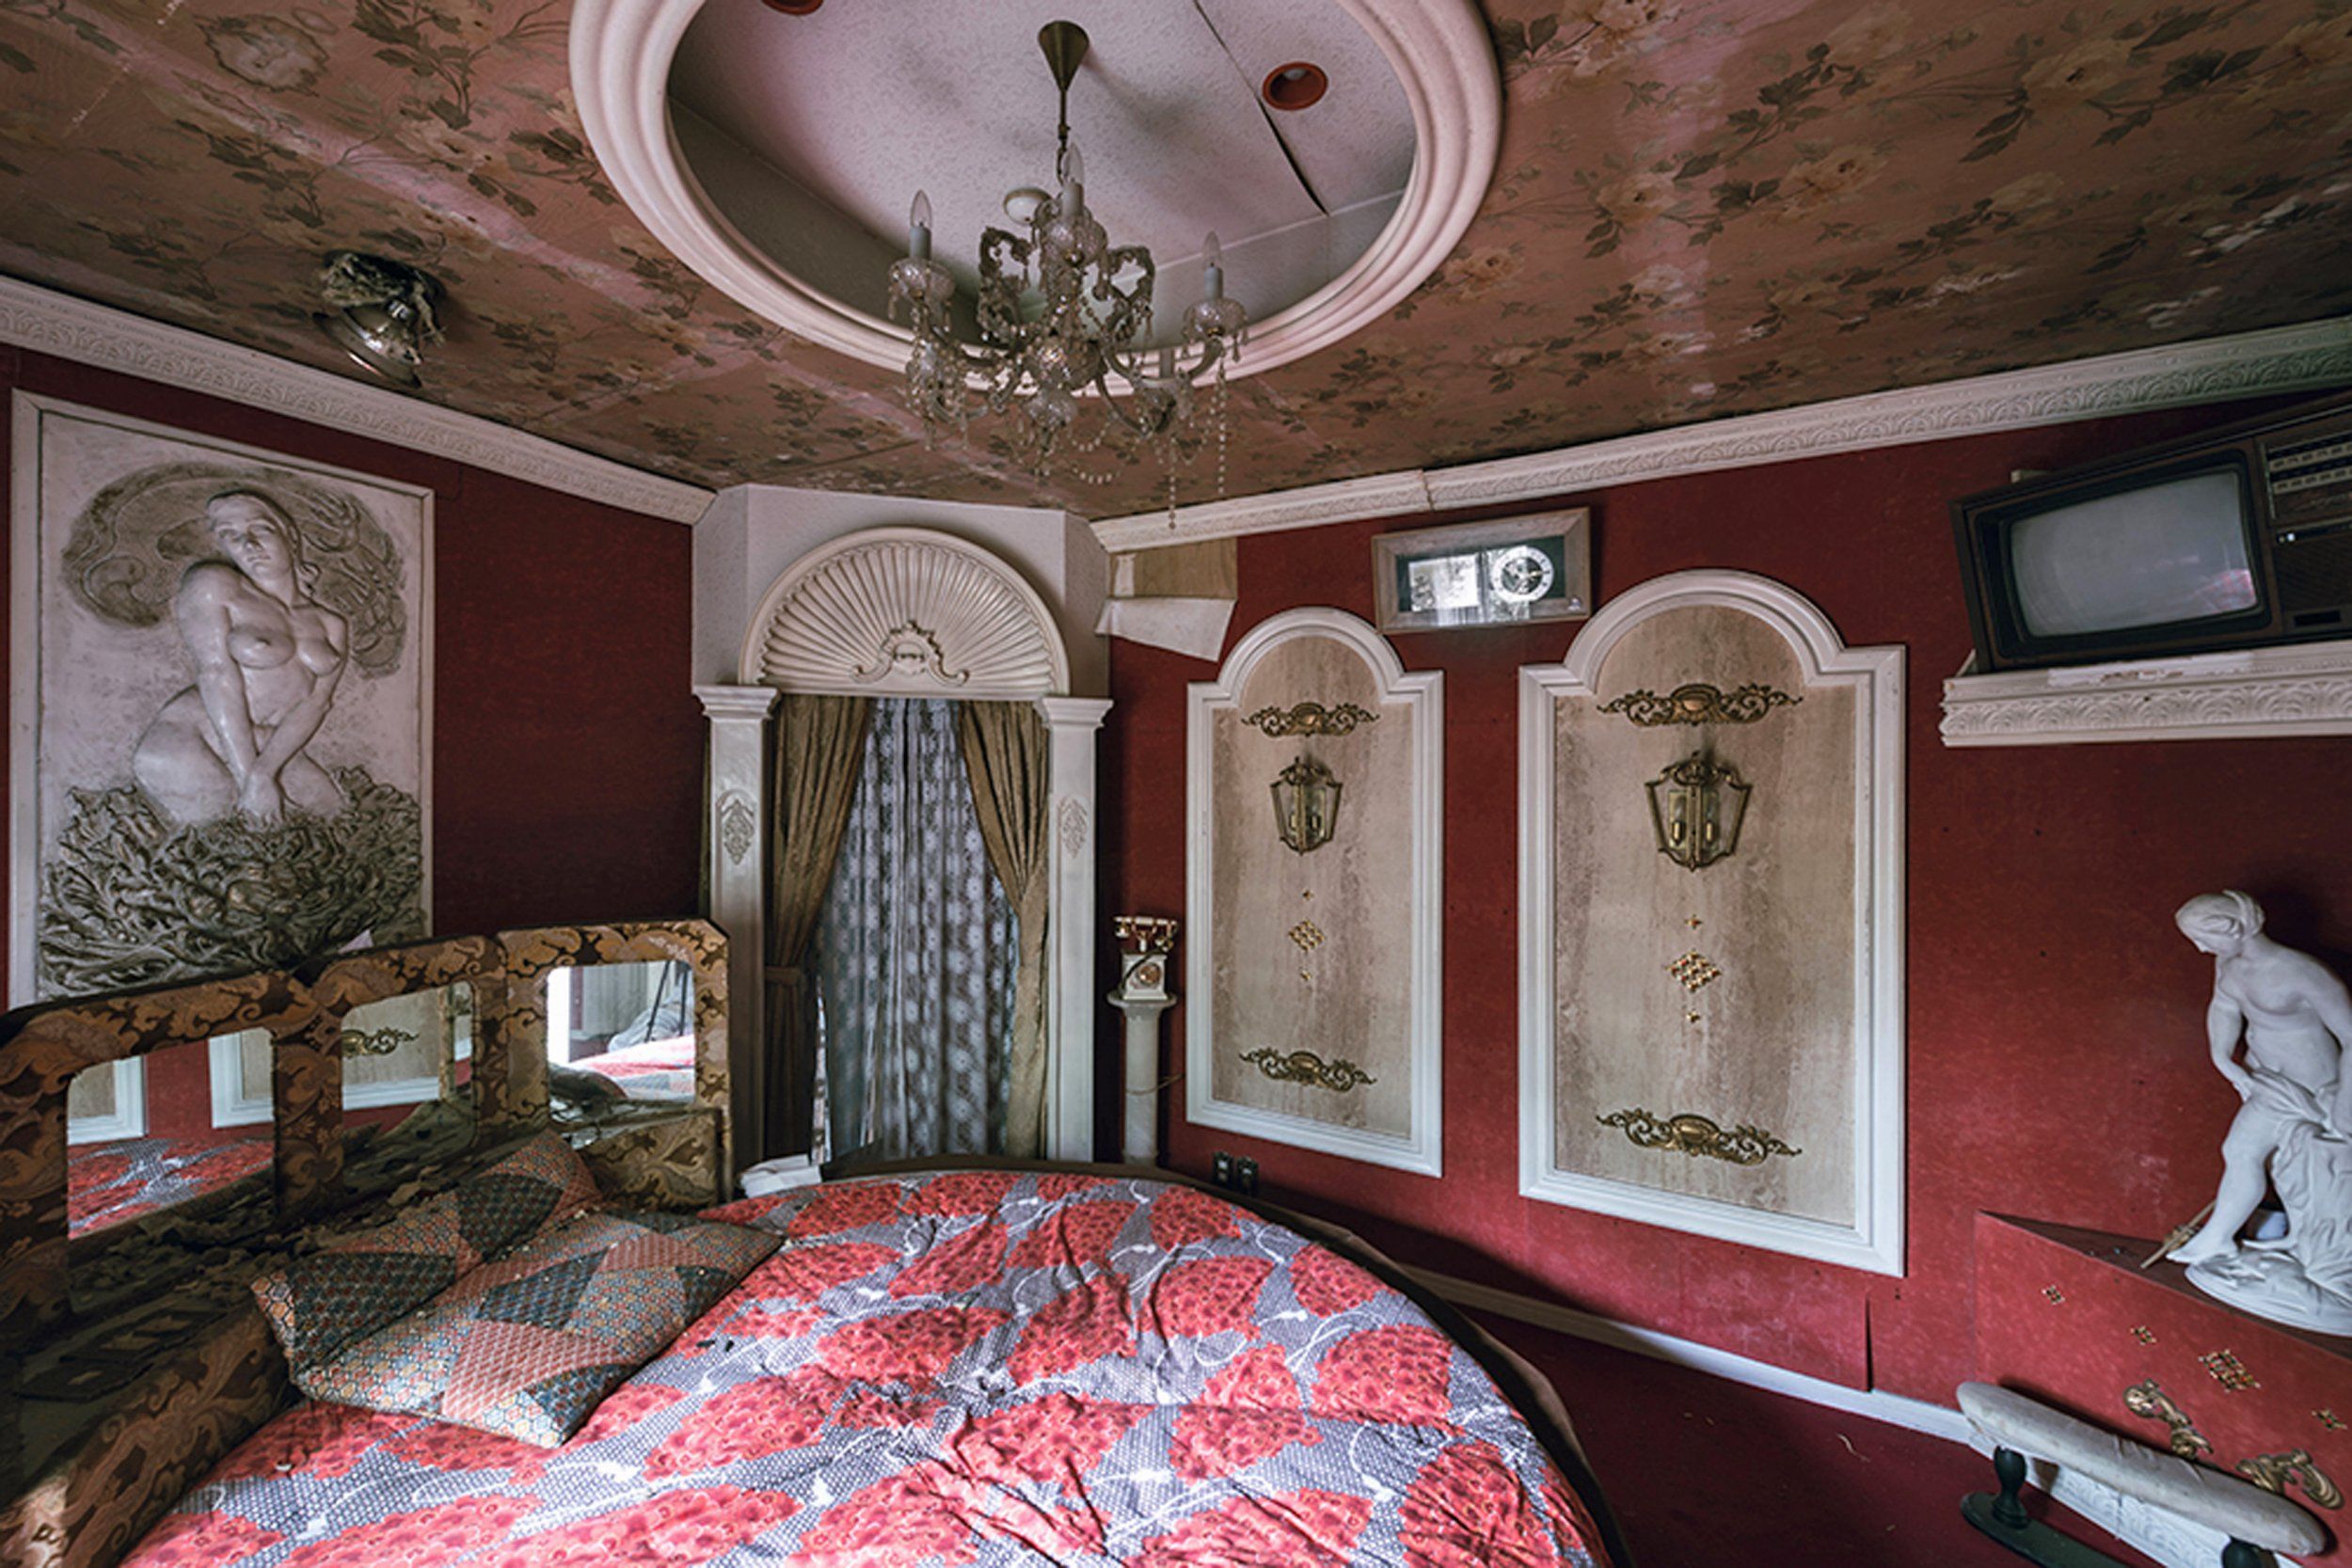 Pictured, one of the suites is decorated to look like a Classical Greek room.